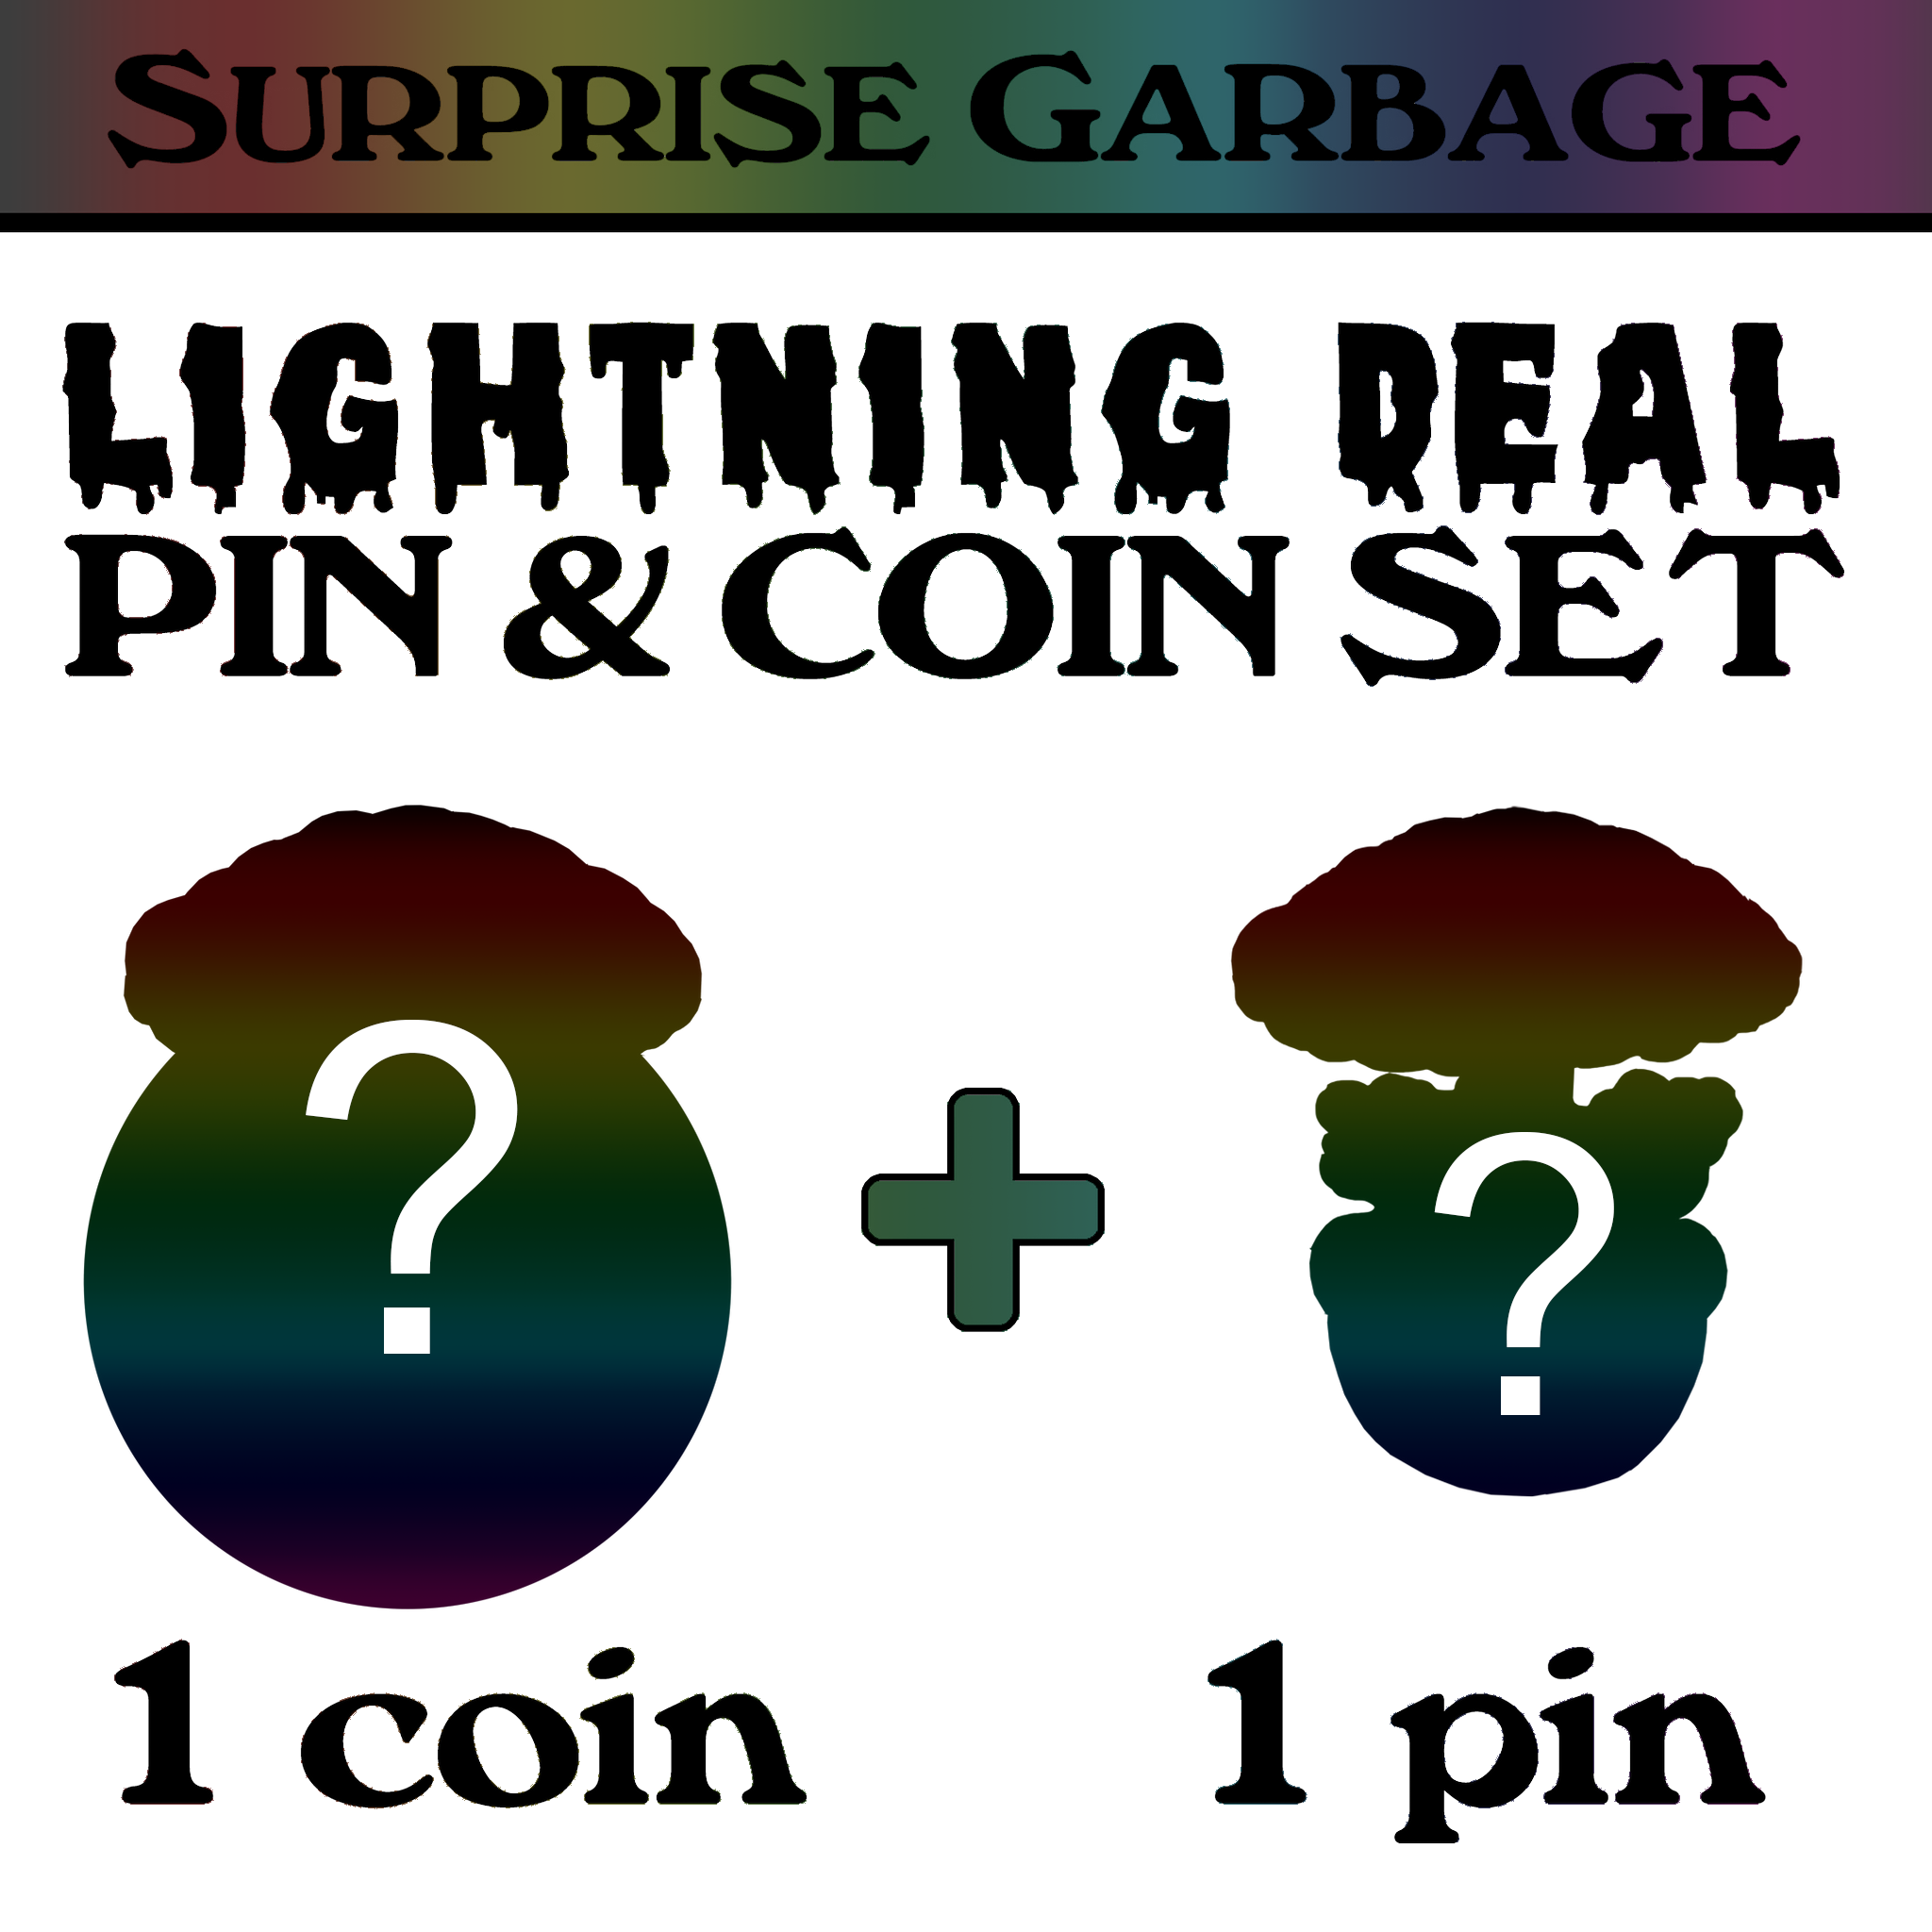 STRICT 1 SET LIMIT: Coin & pin Combo deal: MYSTERY Pin and matching 3-piece Adam Bomb Challenge Coin limited to 15 pieces with individual serial number